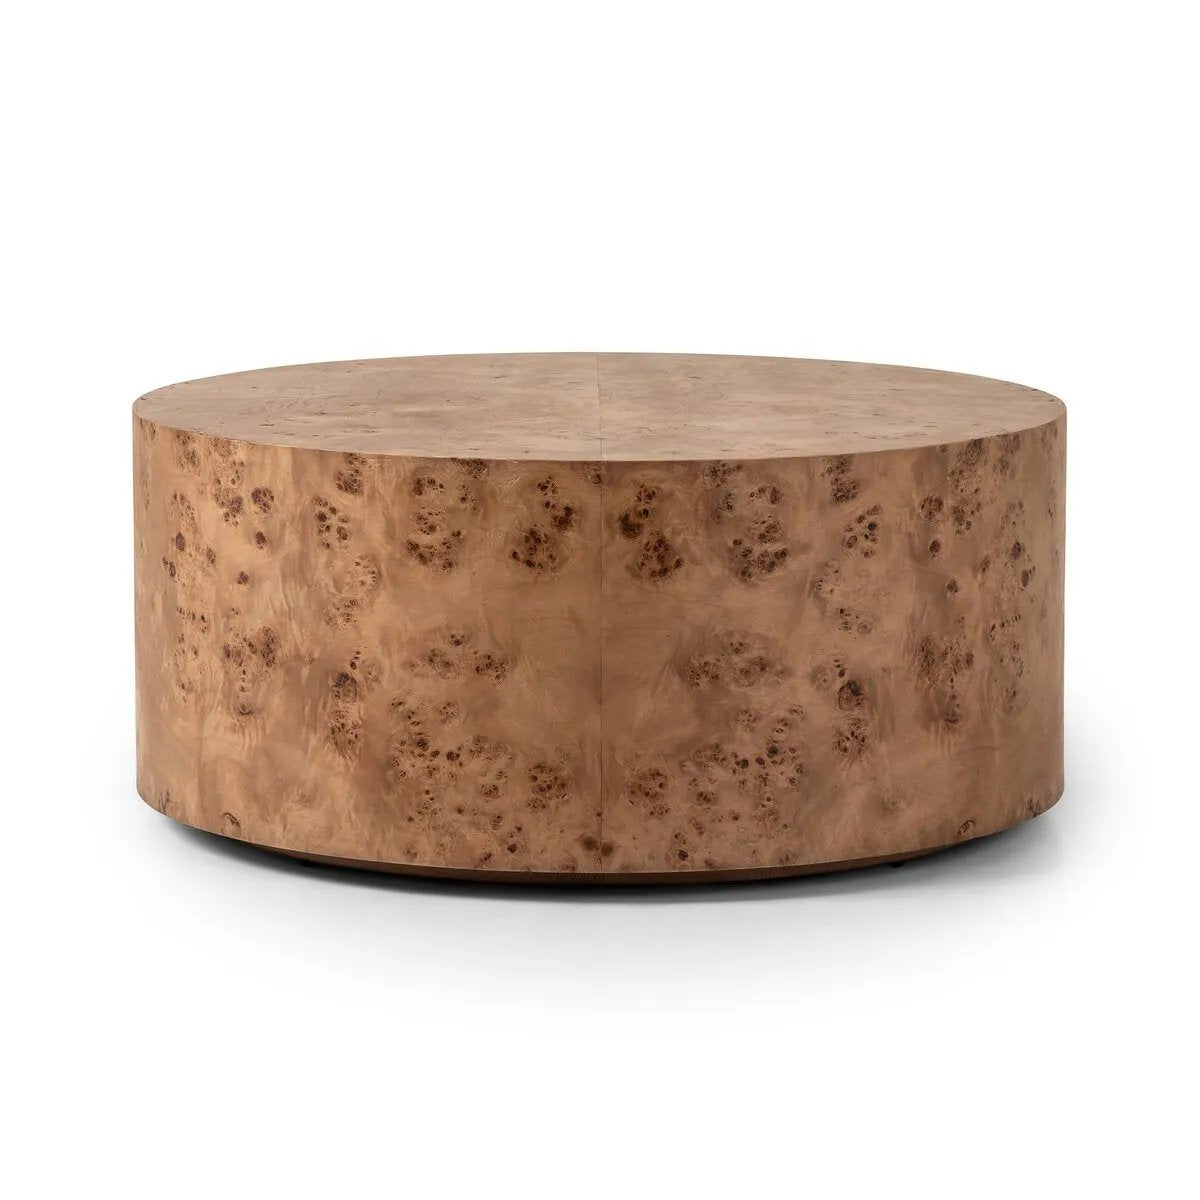 Simple drum shaping showcases the natural artistry of the richly grained caramel burl veneer. Its compact size is ideal for smaller spaces.Collection: Hughe Amethyst Home provides interior design, new home construction design consulting, vintage area rugs, and lighting in the Calabasas metro area.